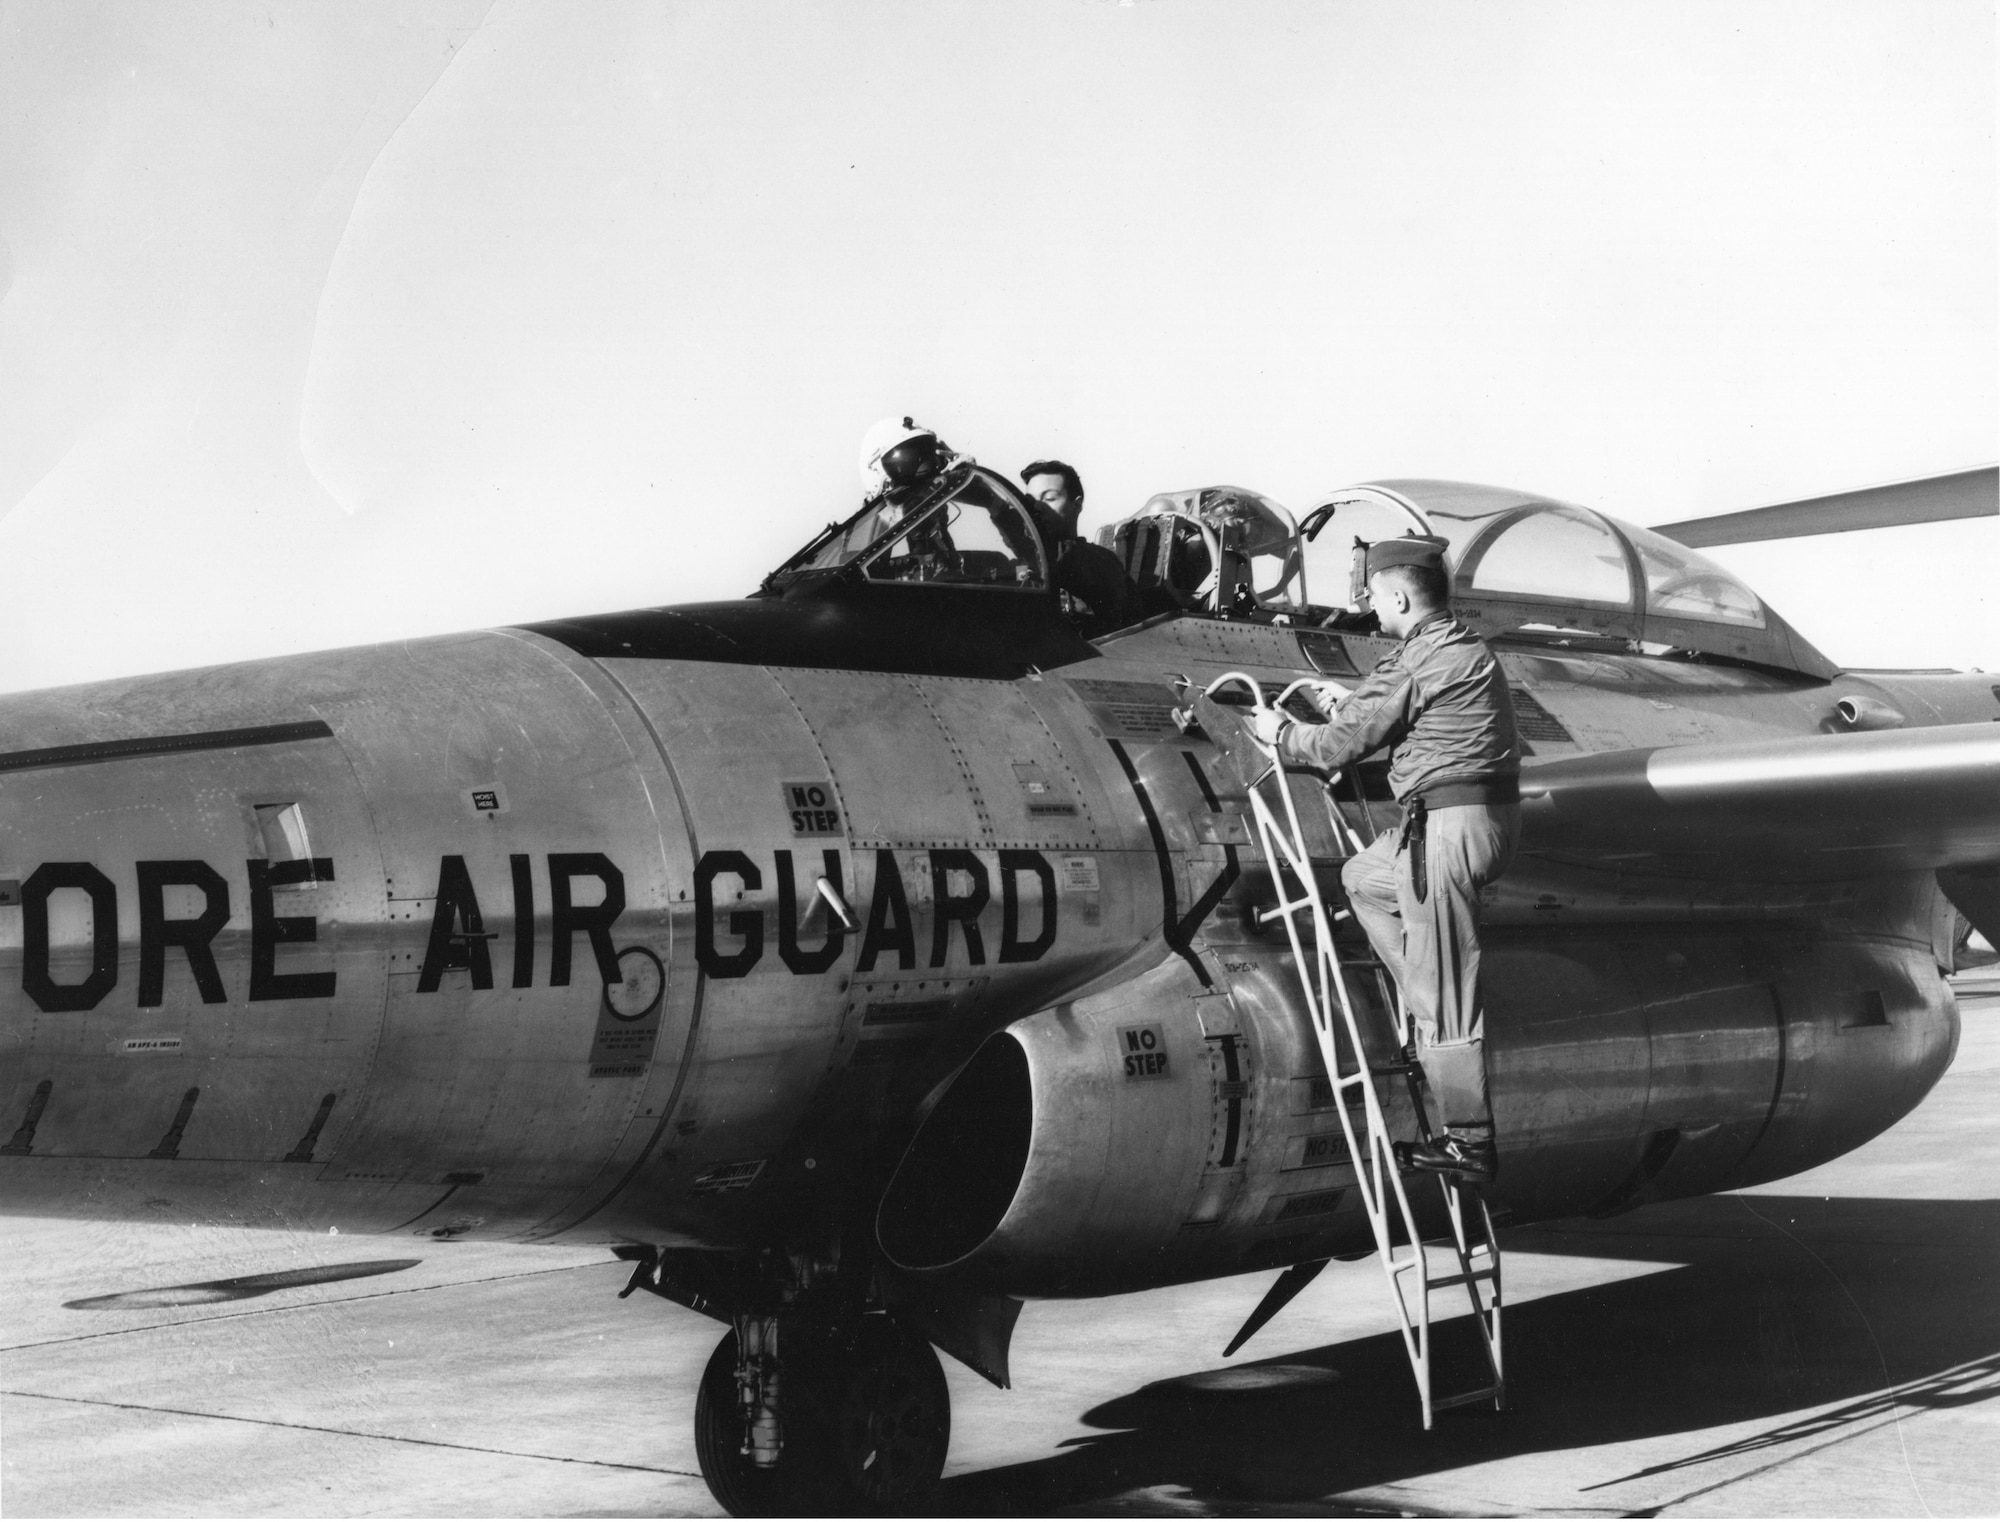 Oregon Air National Guard 123rd Fighter-Interceptor Squadron F-89J Scorpion pilot Bradford A. Newell sits in the front cockpit with hands by his helmet in this undated picture from the early 1960’s, as another crewmember, probably the aircraft’s radar observer, stands on the ladder.  Perhaps they have just finished a sortie in this natural-metal finish Northrop F-89J Scorpion fighter-interceptor.  (142nd Wing History Archive)